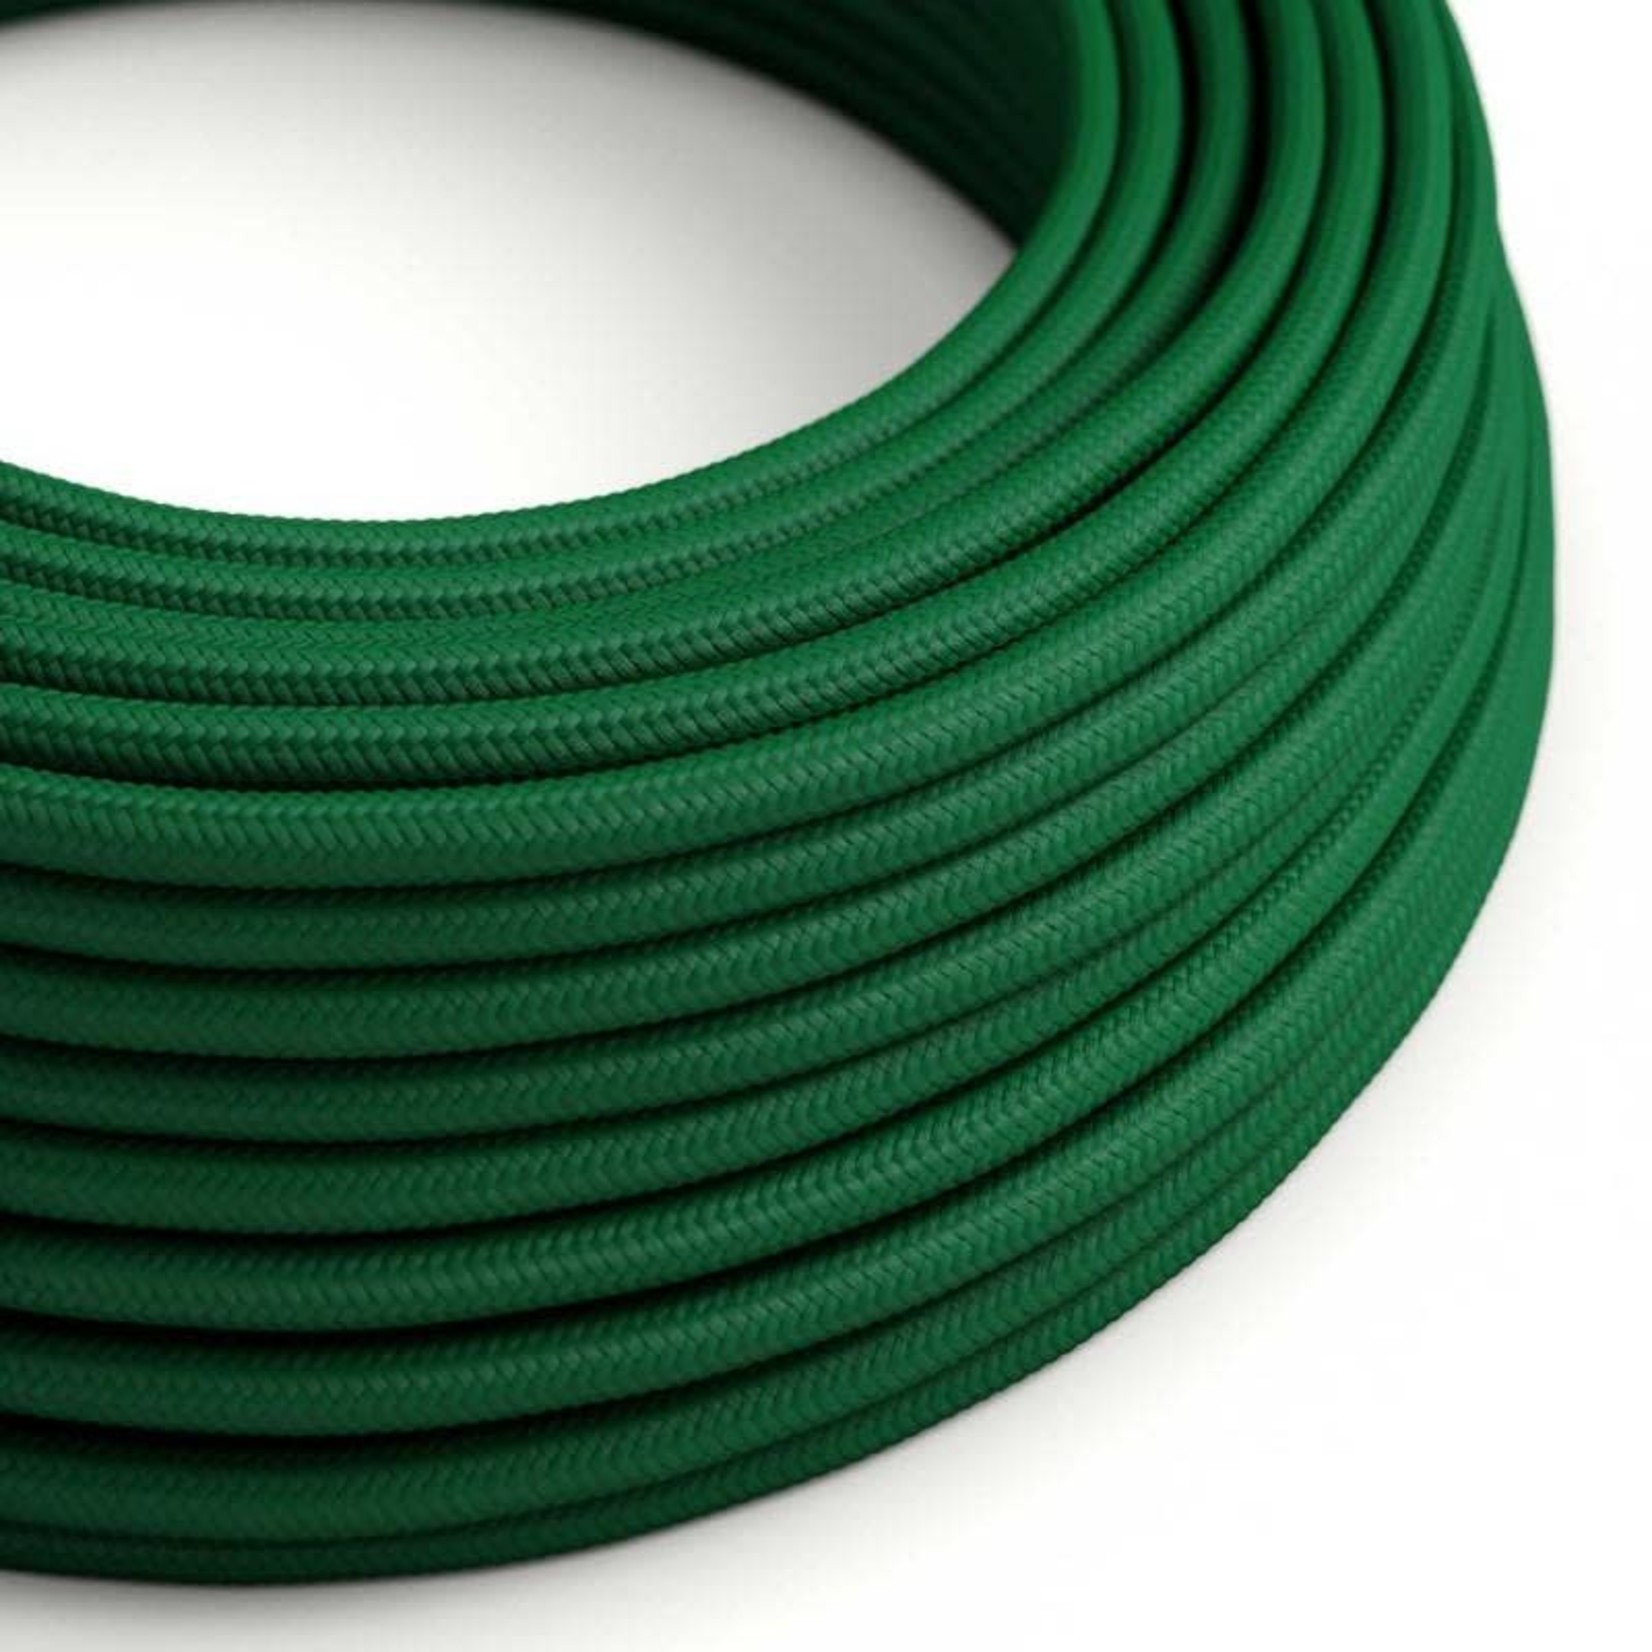 CCIT Per Metre - Round Electric Cable Flex covered by Rayon solid color fabric Dark Green